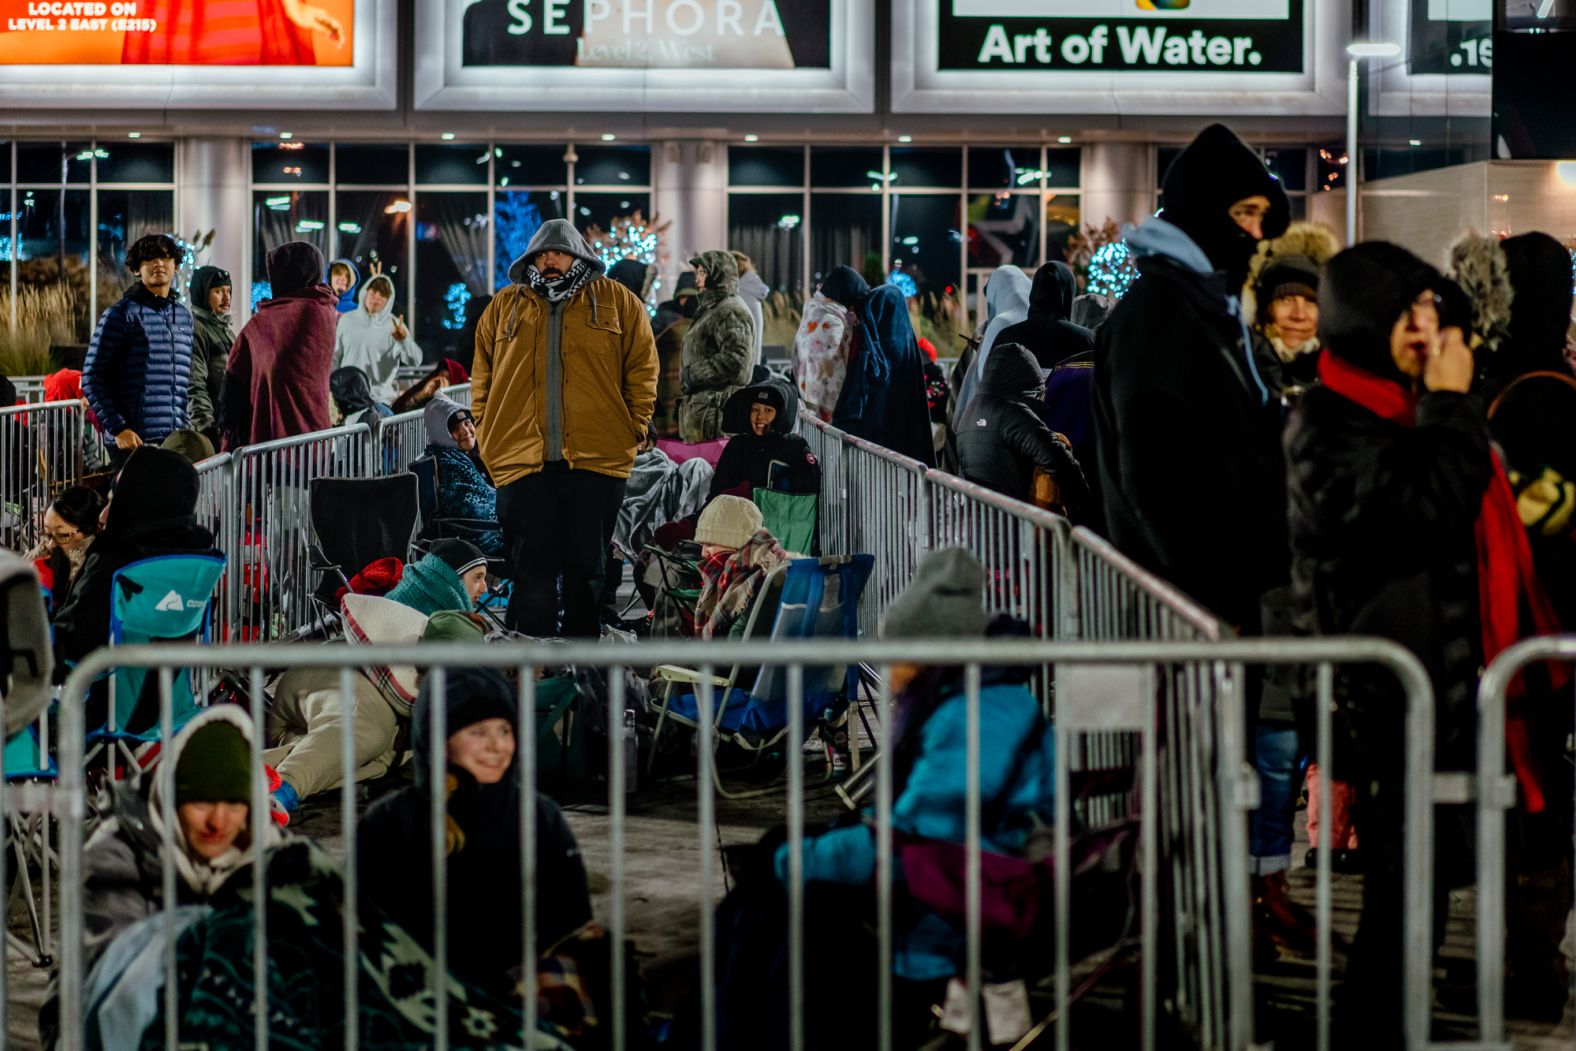 Hundreds of people line up for Black Friday outside the Mall of America in Bloomington. At 5.6 million square feet, it's <a href="index.php?page=&url=https%3A%2F%2Fwww.cnn.com%2F2022%2F11%2F25%2Feconomy%2Fblack-friday-mall-of-america%2Findex.html" target="_blank">the nation's largest shopping and entertainment center</a>.